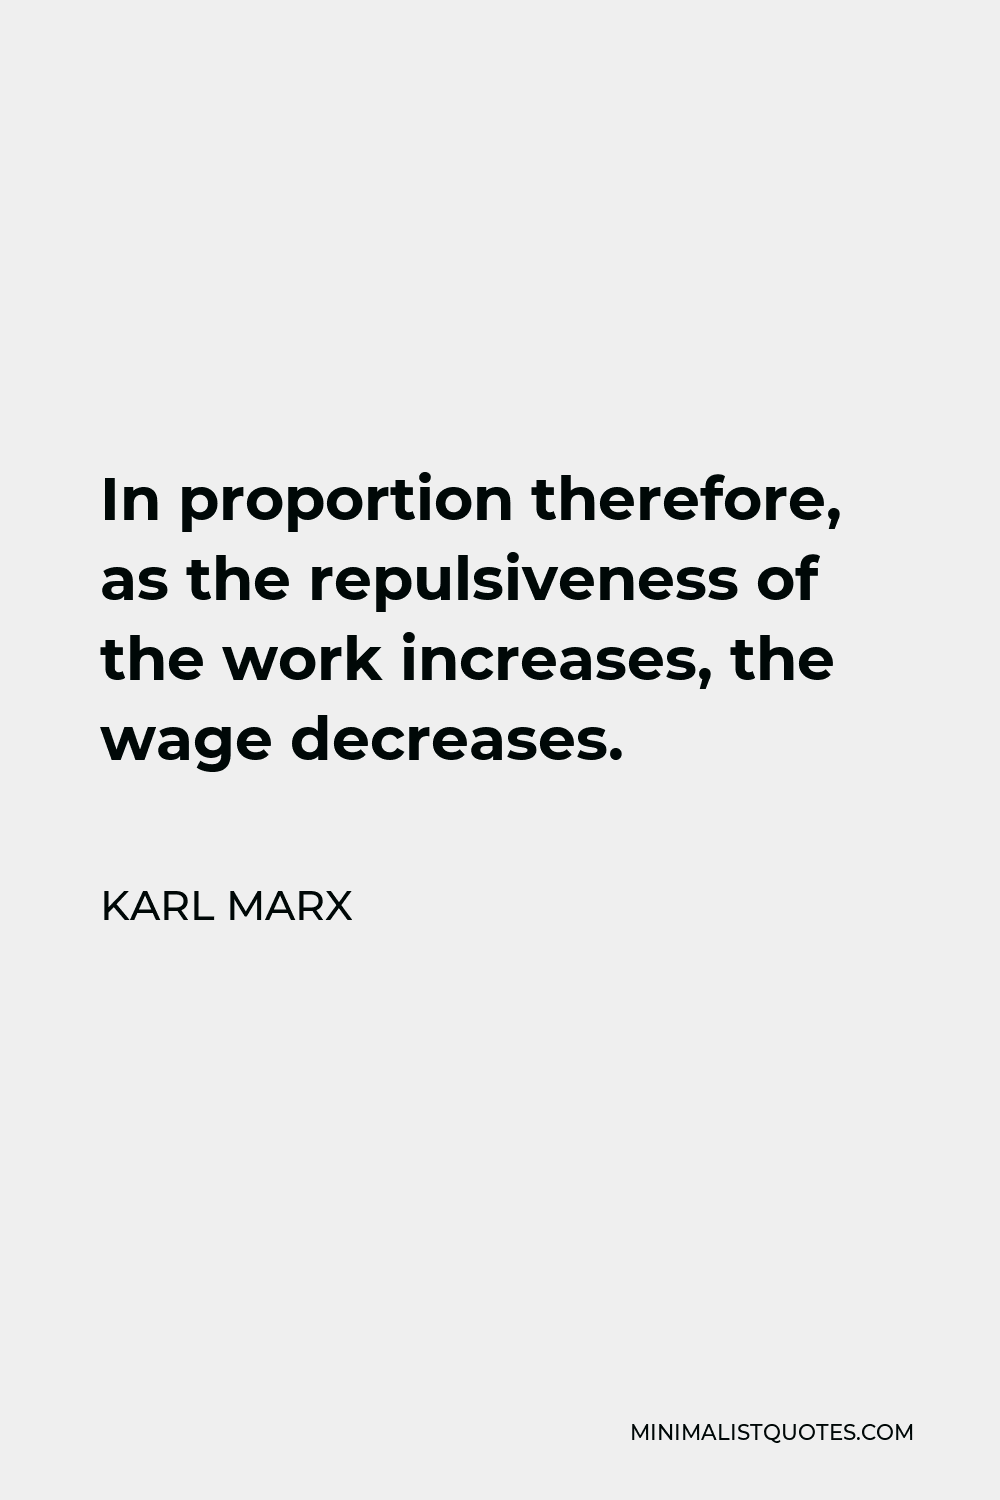 Karl Marx Quote - In proportion therefore, as the repulsiveness of the work increases, the wage decreases.